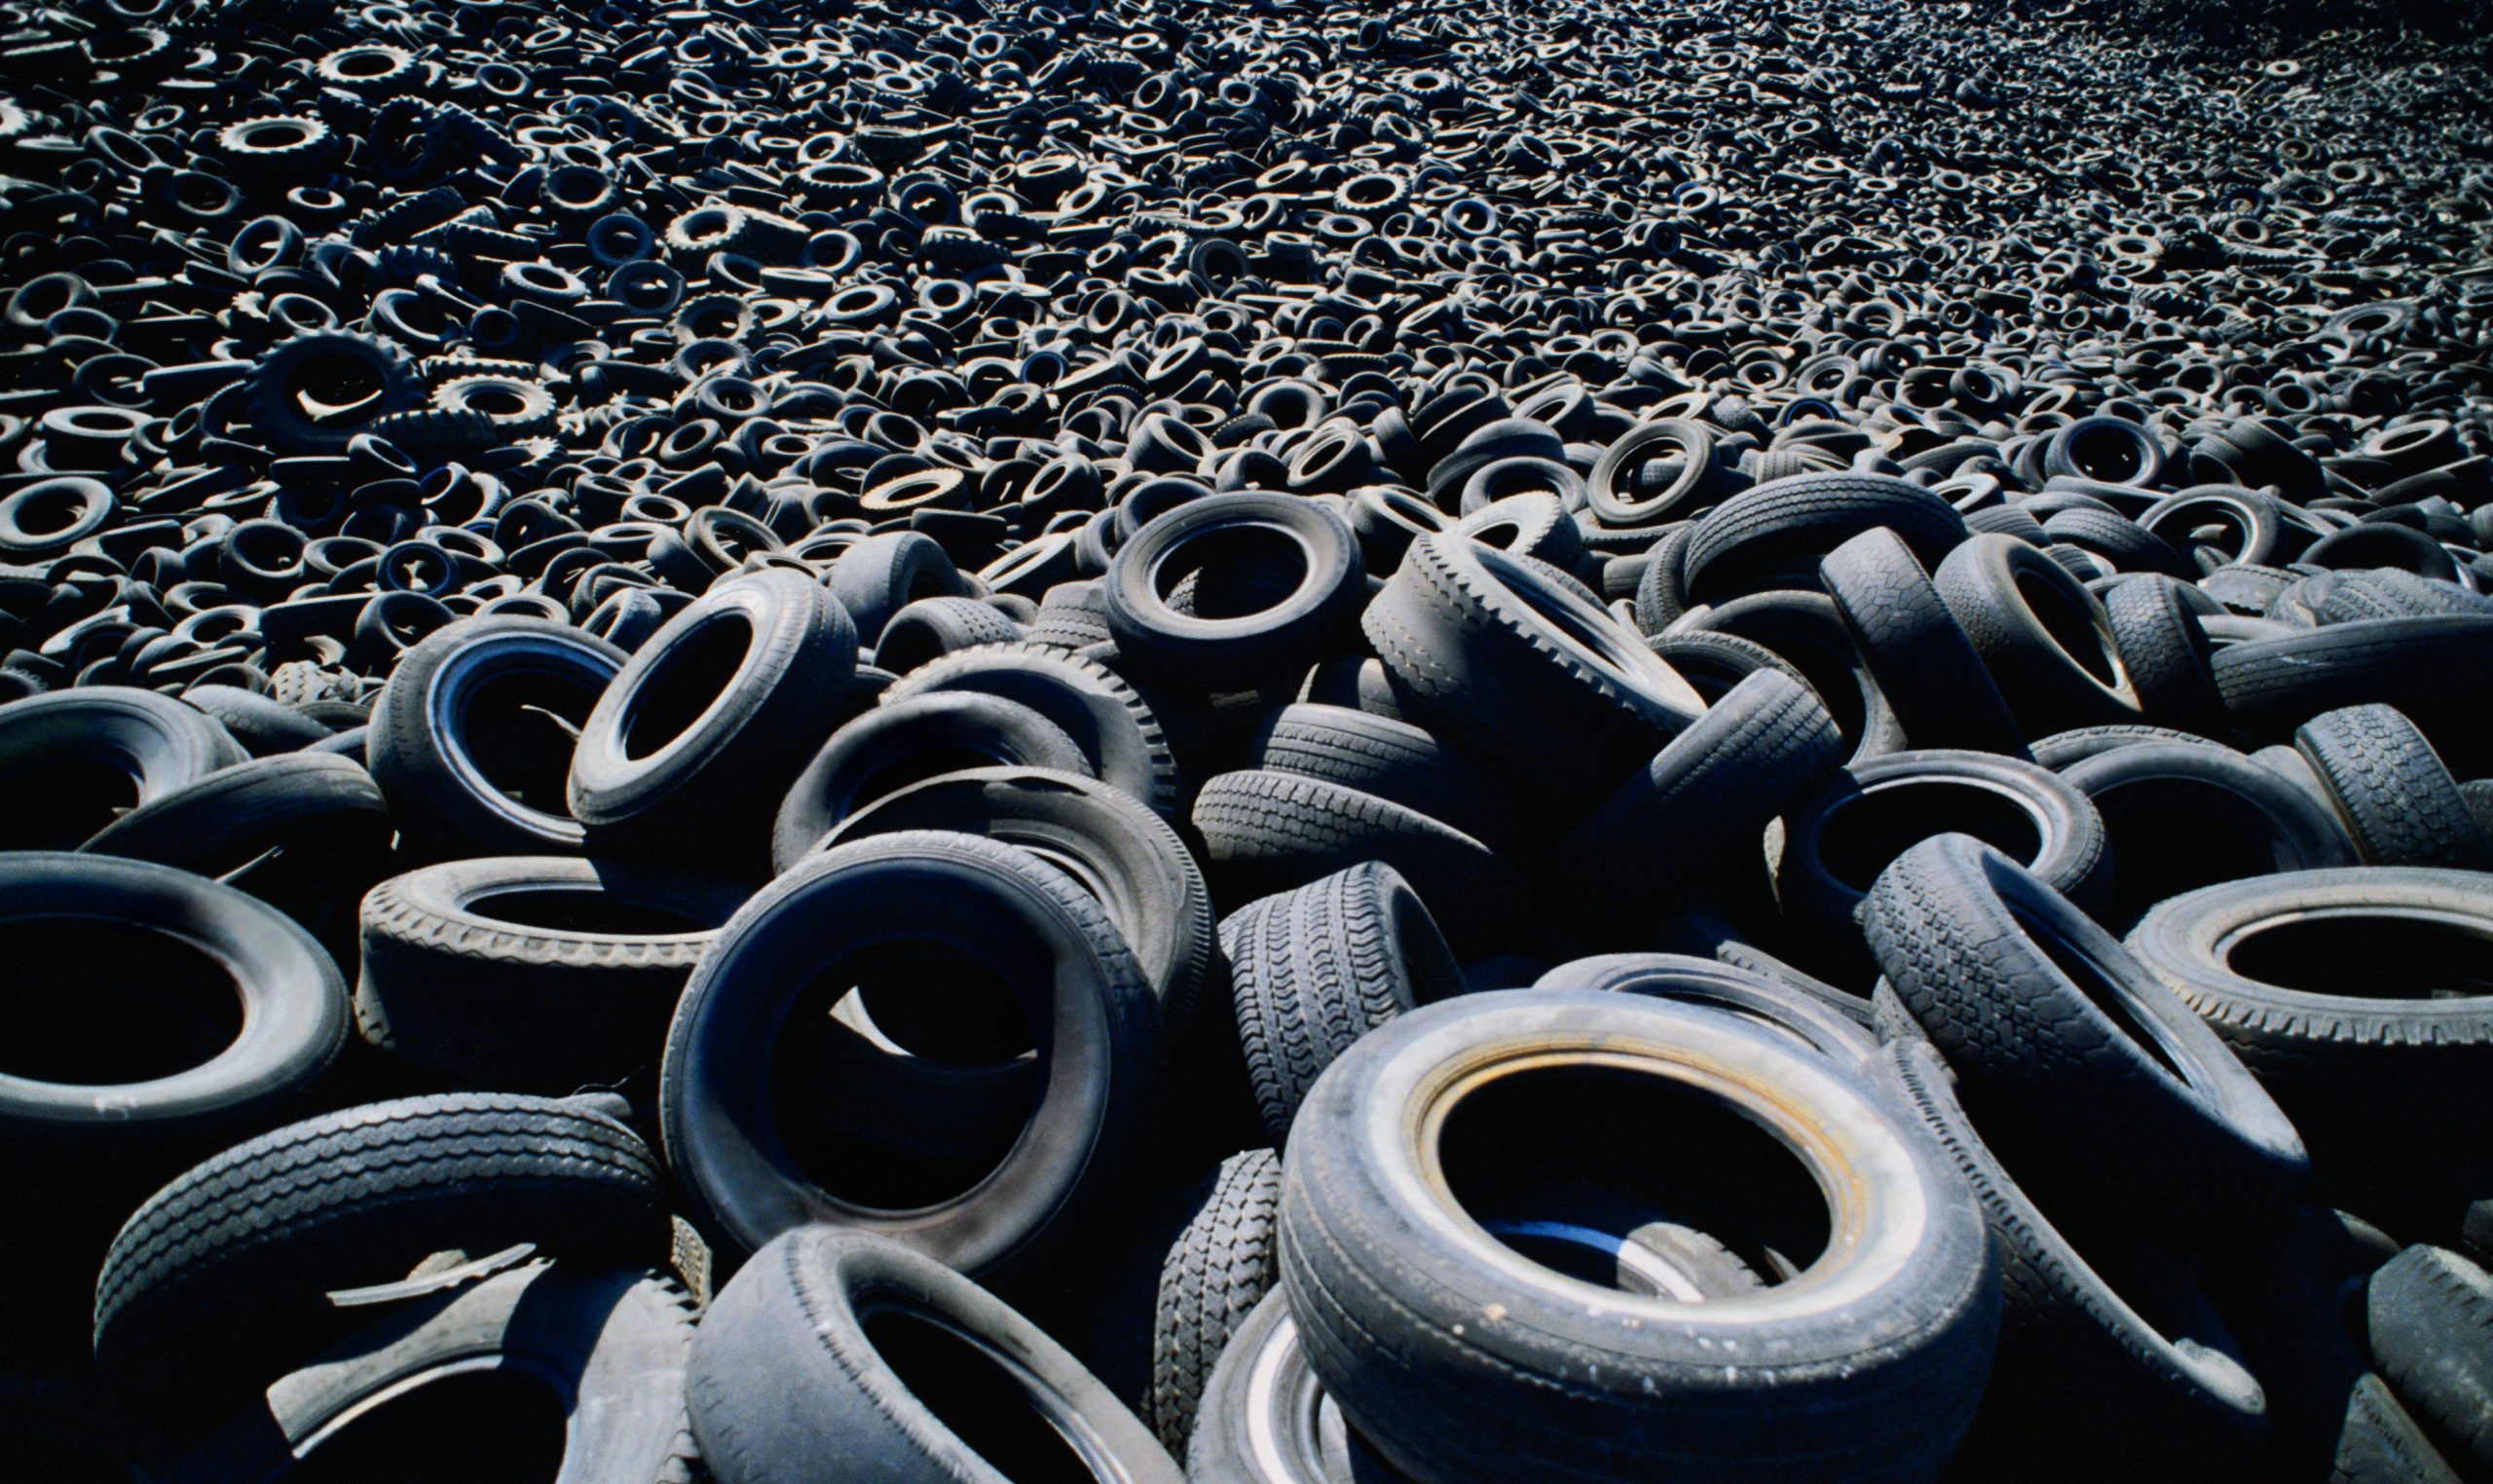 Pyrum Conducts Pilot Project in Saarland, Germany, with BMW Group to Recycle Tyres